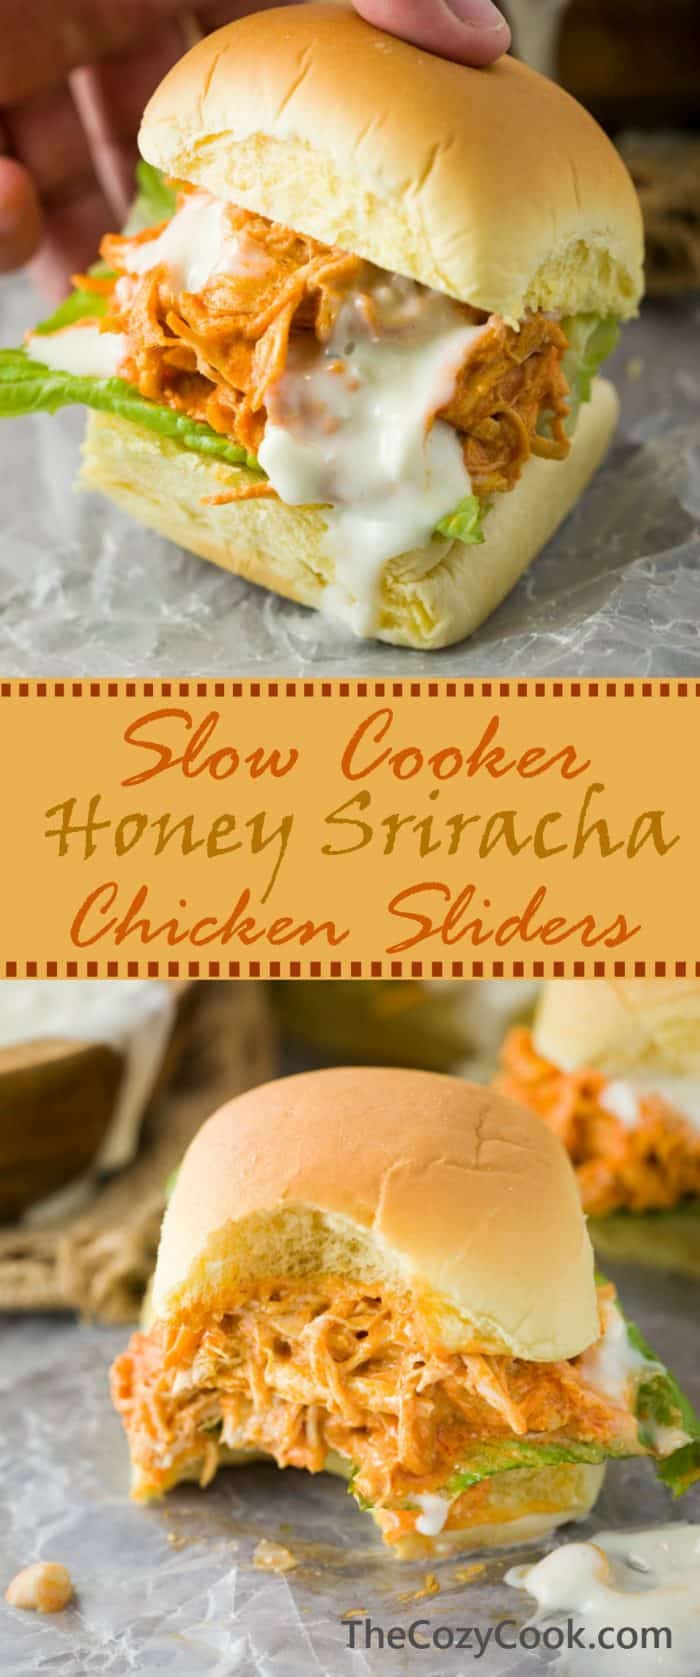 These slow cooker honey sriracha chicken sliders feature tender, slow cooked shredded chicken smothered in a sweet and tangy honey sriracha sauce, placed in a fresh slider roll and drizzled with savory blue cheese. | The Cozy Cook | #Sriracha #Chicken #Sliders #HoneySriracha #Sandwiches #SlowCooker #CrockPot #BlueCheese #BuffaloSauce